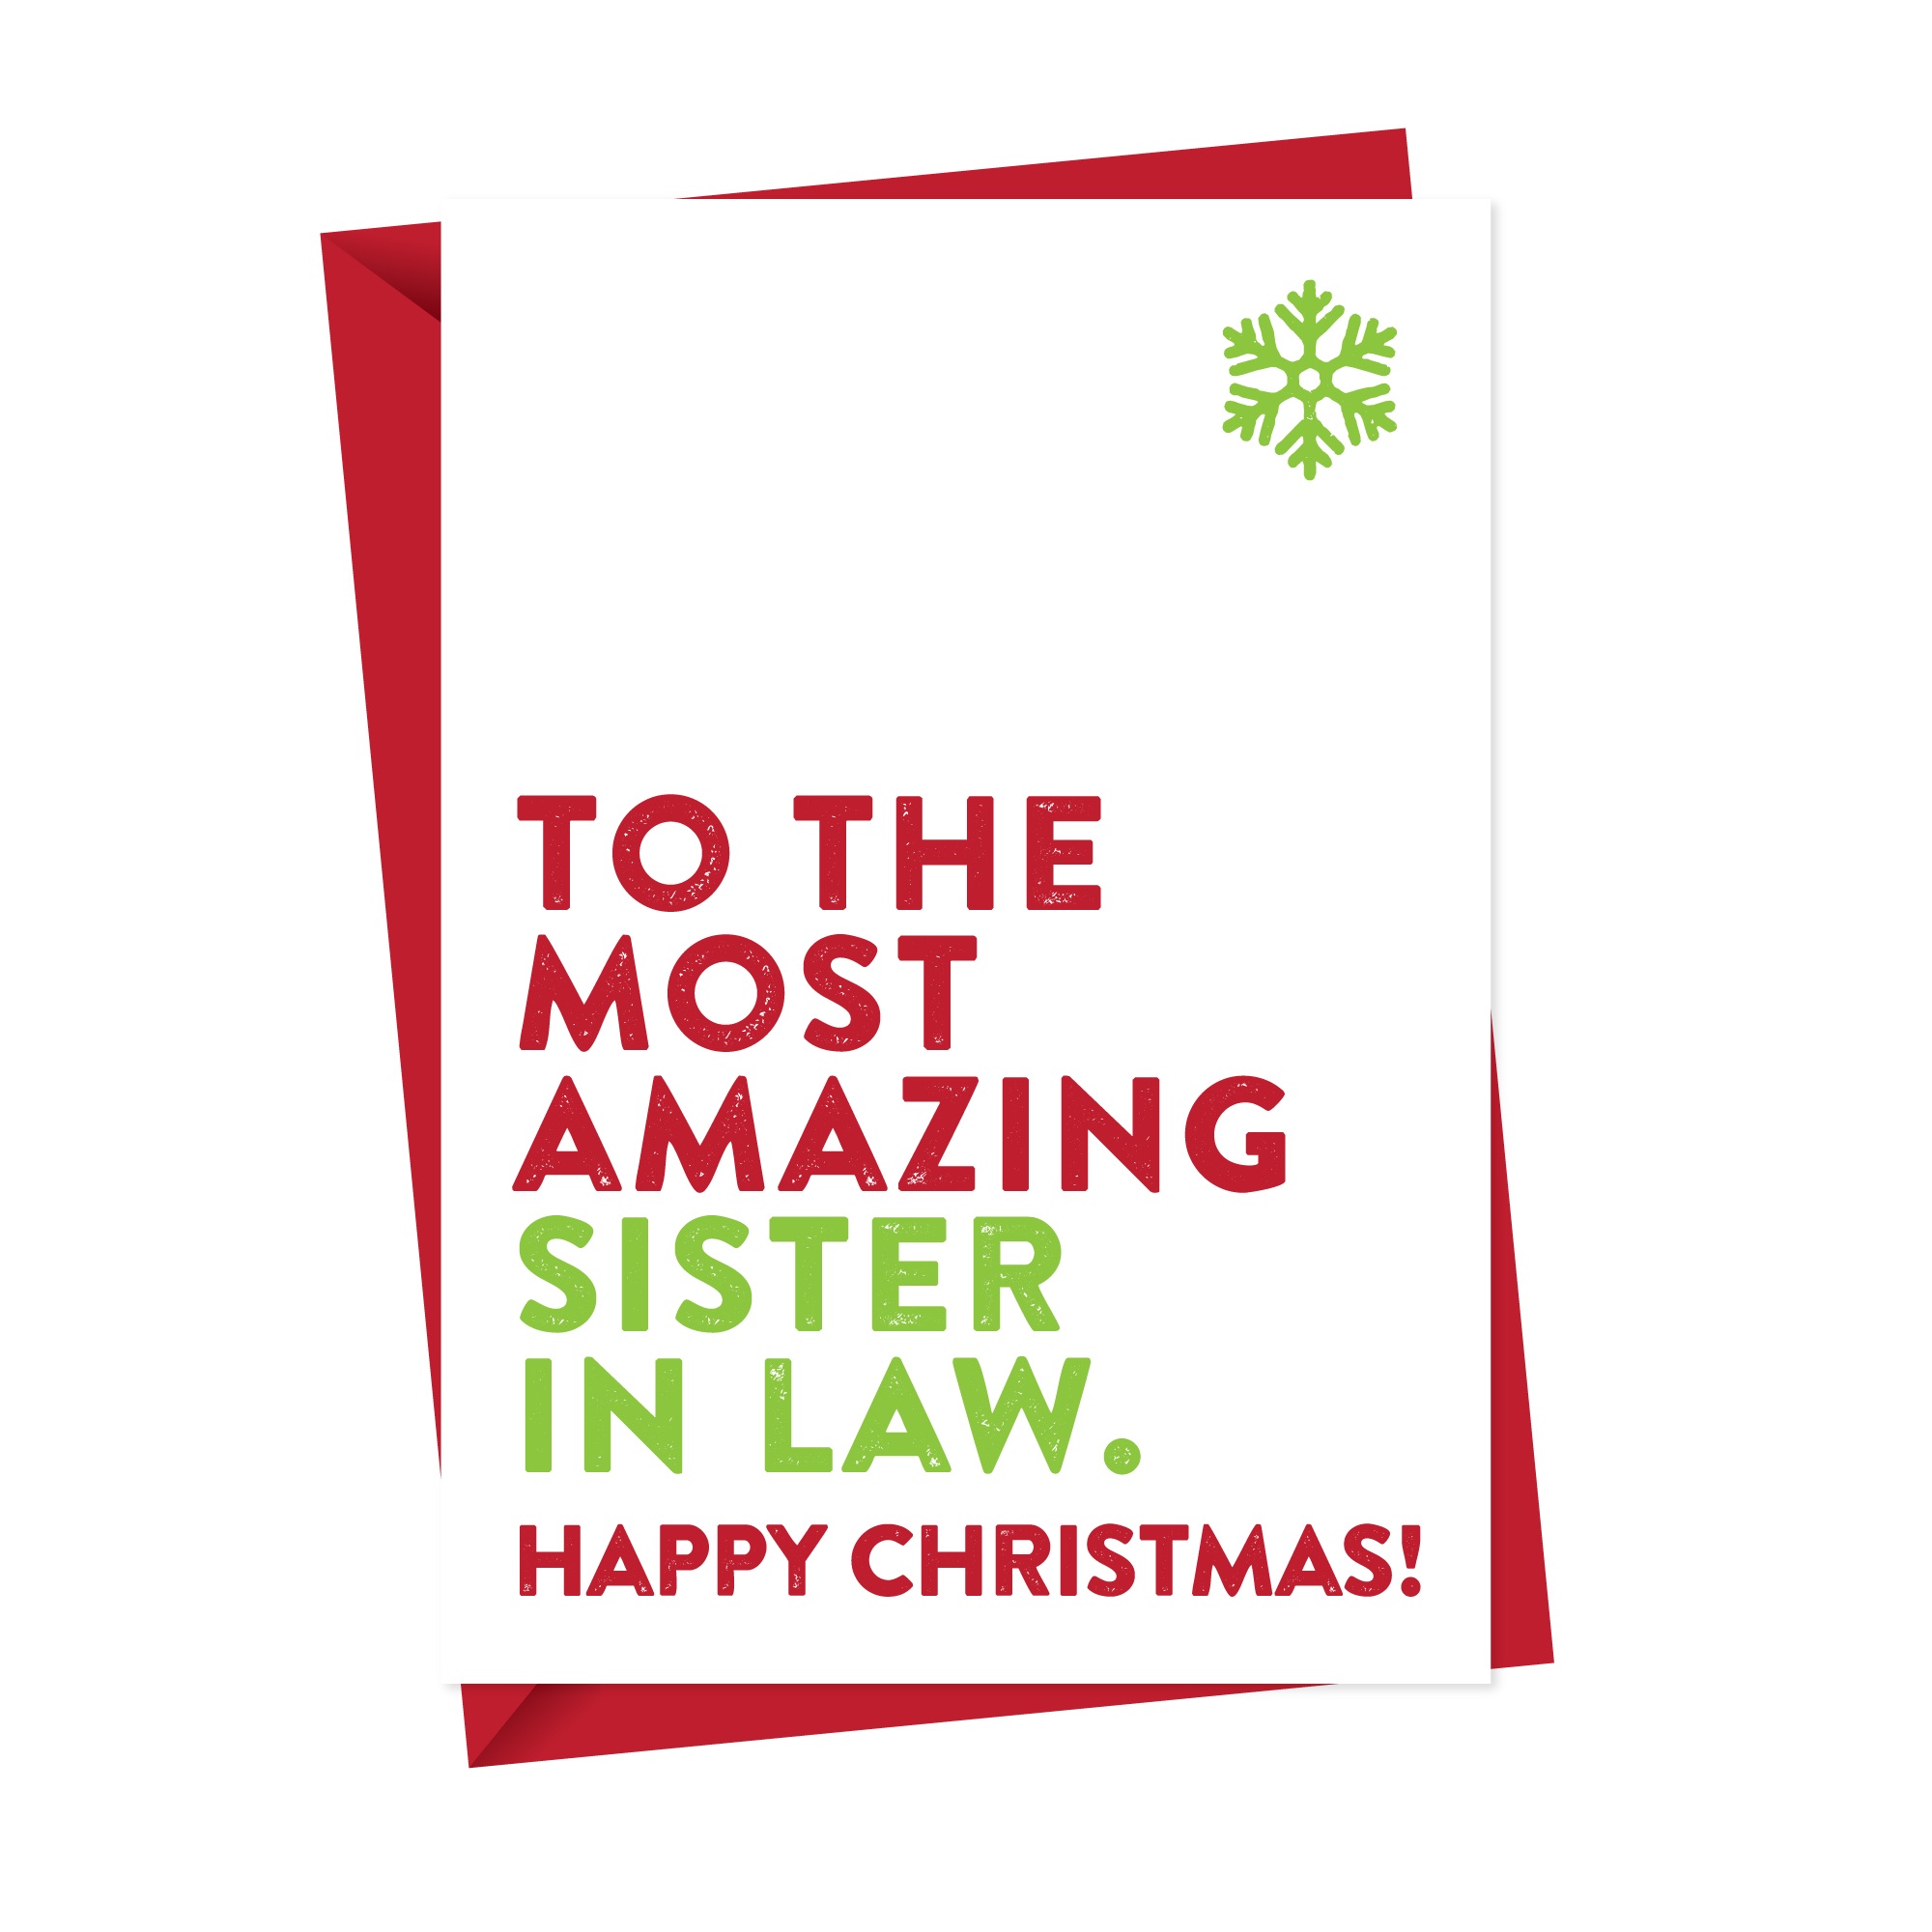 Most Amazing Sister in Law Christmas Card